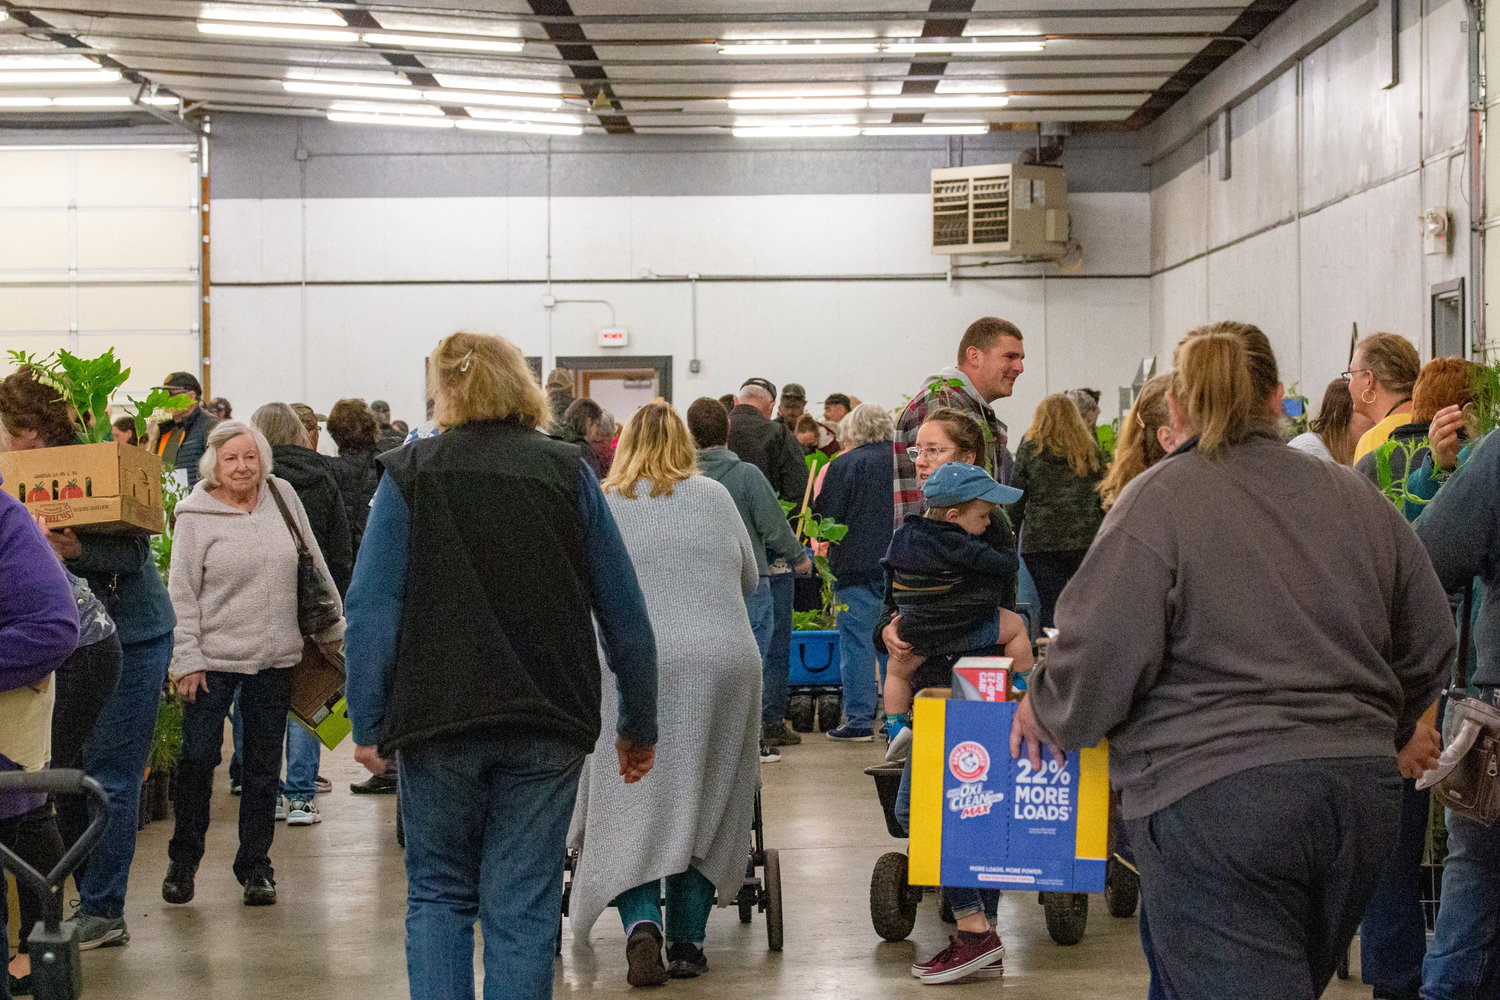 A building full of shoppers at the Master Gardener Plant Sale event at the Southwest Washington Fairgrounds Saturday.